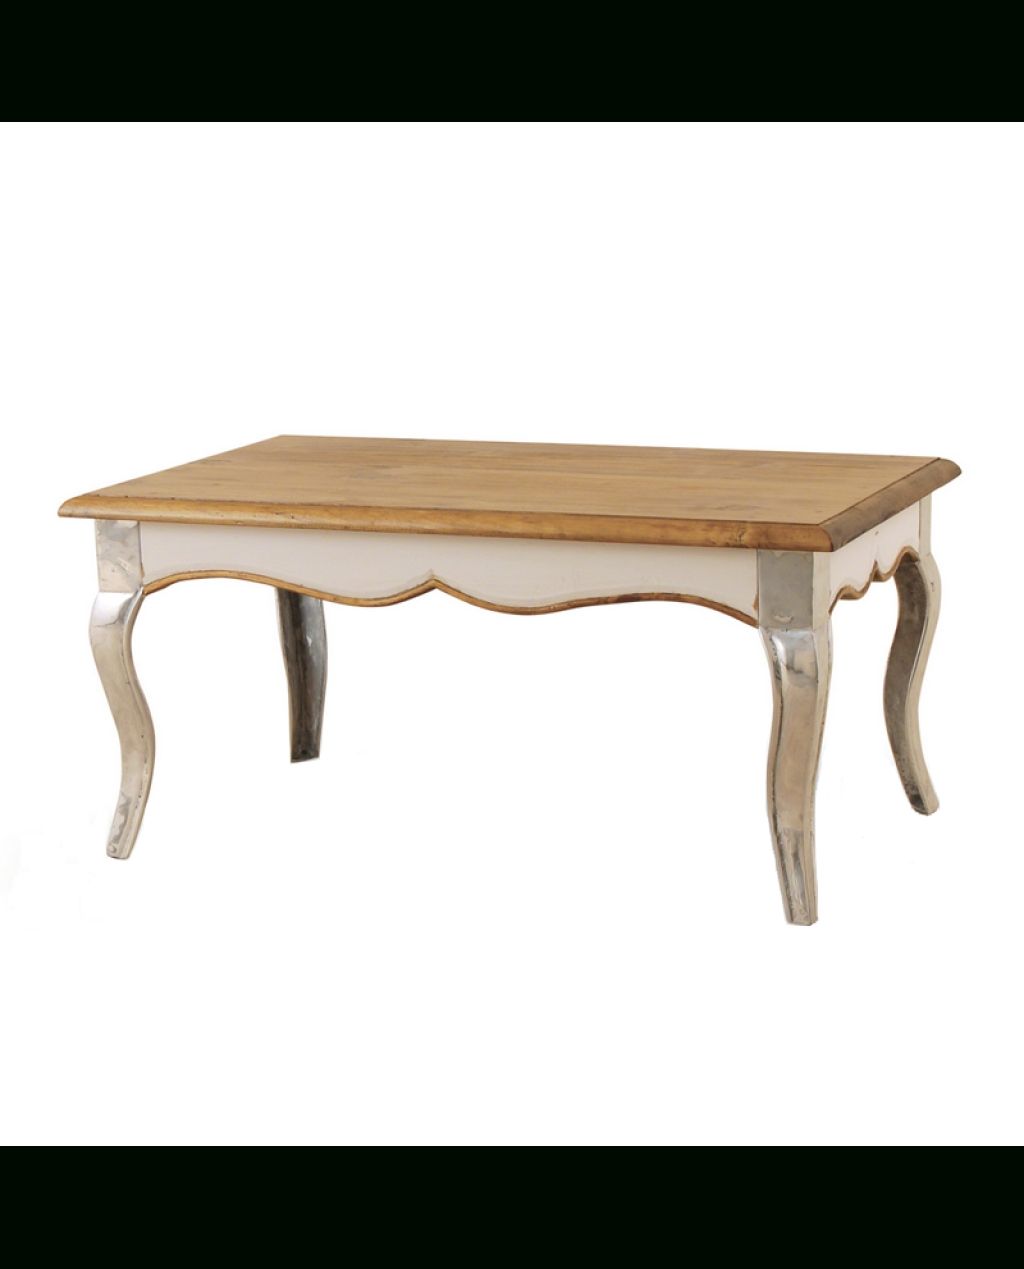 French Style Coffee Table Furniture Hire Intended For Widely Used French Style Coffee Tables (View 7 of 20)